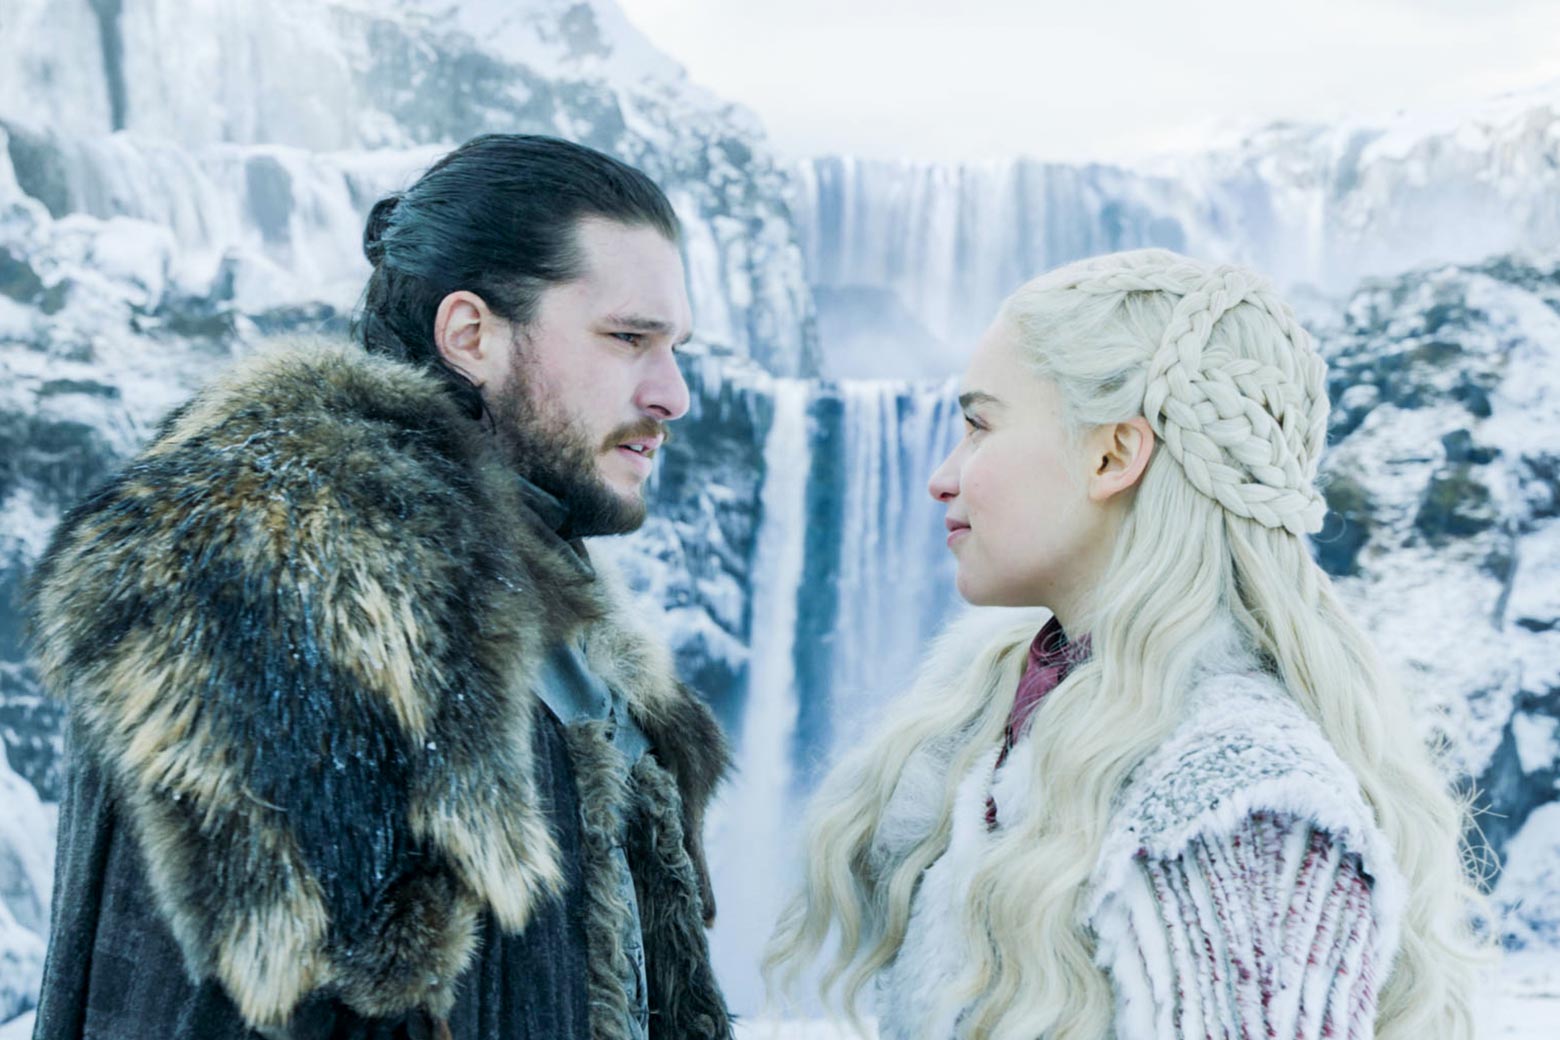 Game of Thrones: How bad is it to marry your aunt, as Jon Snow might do?